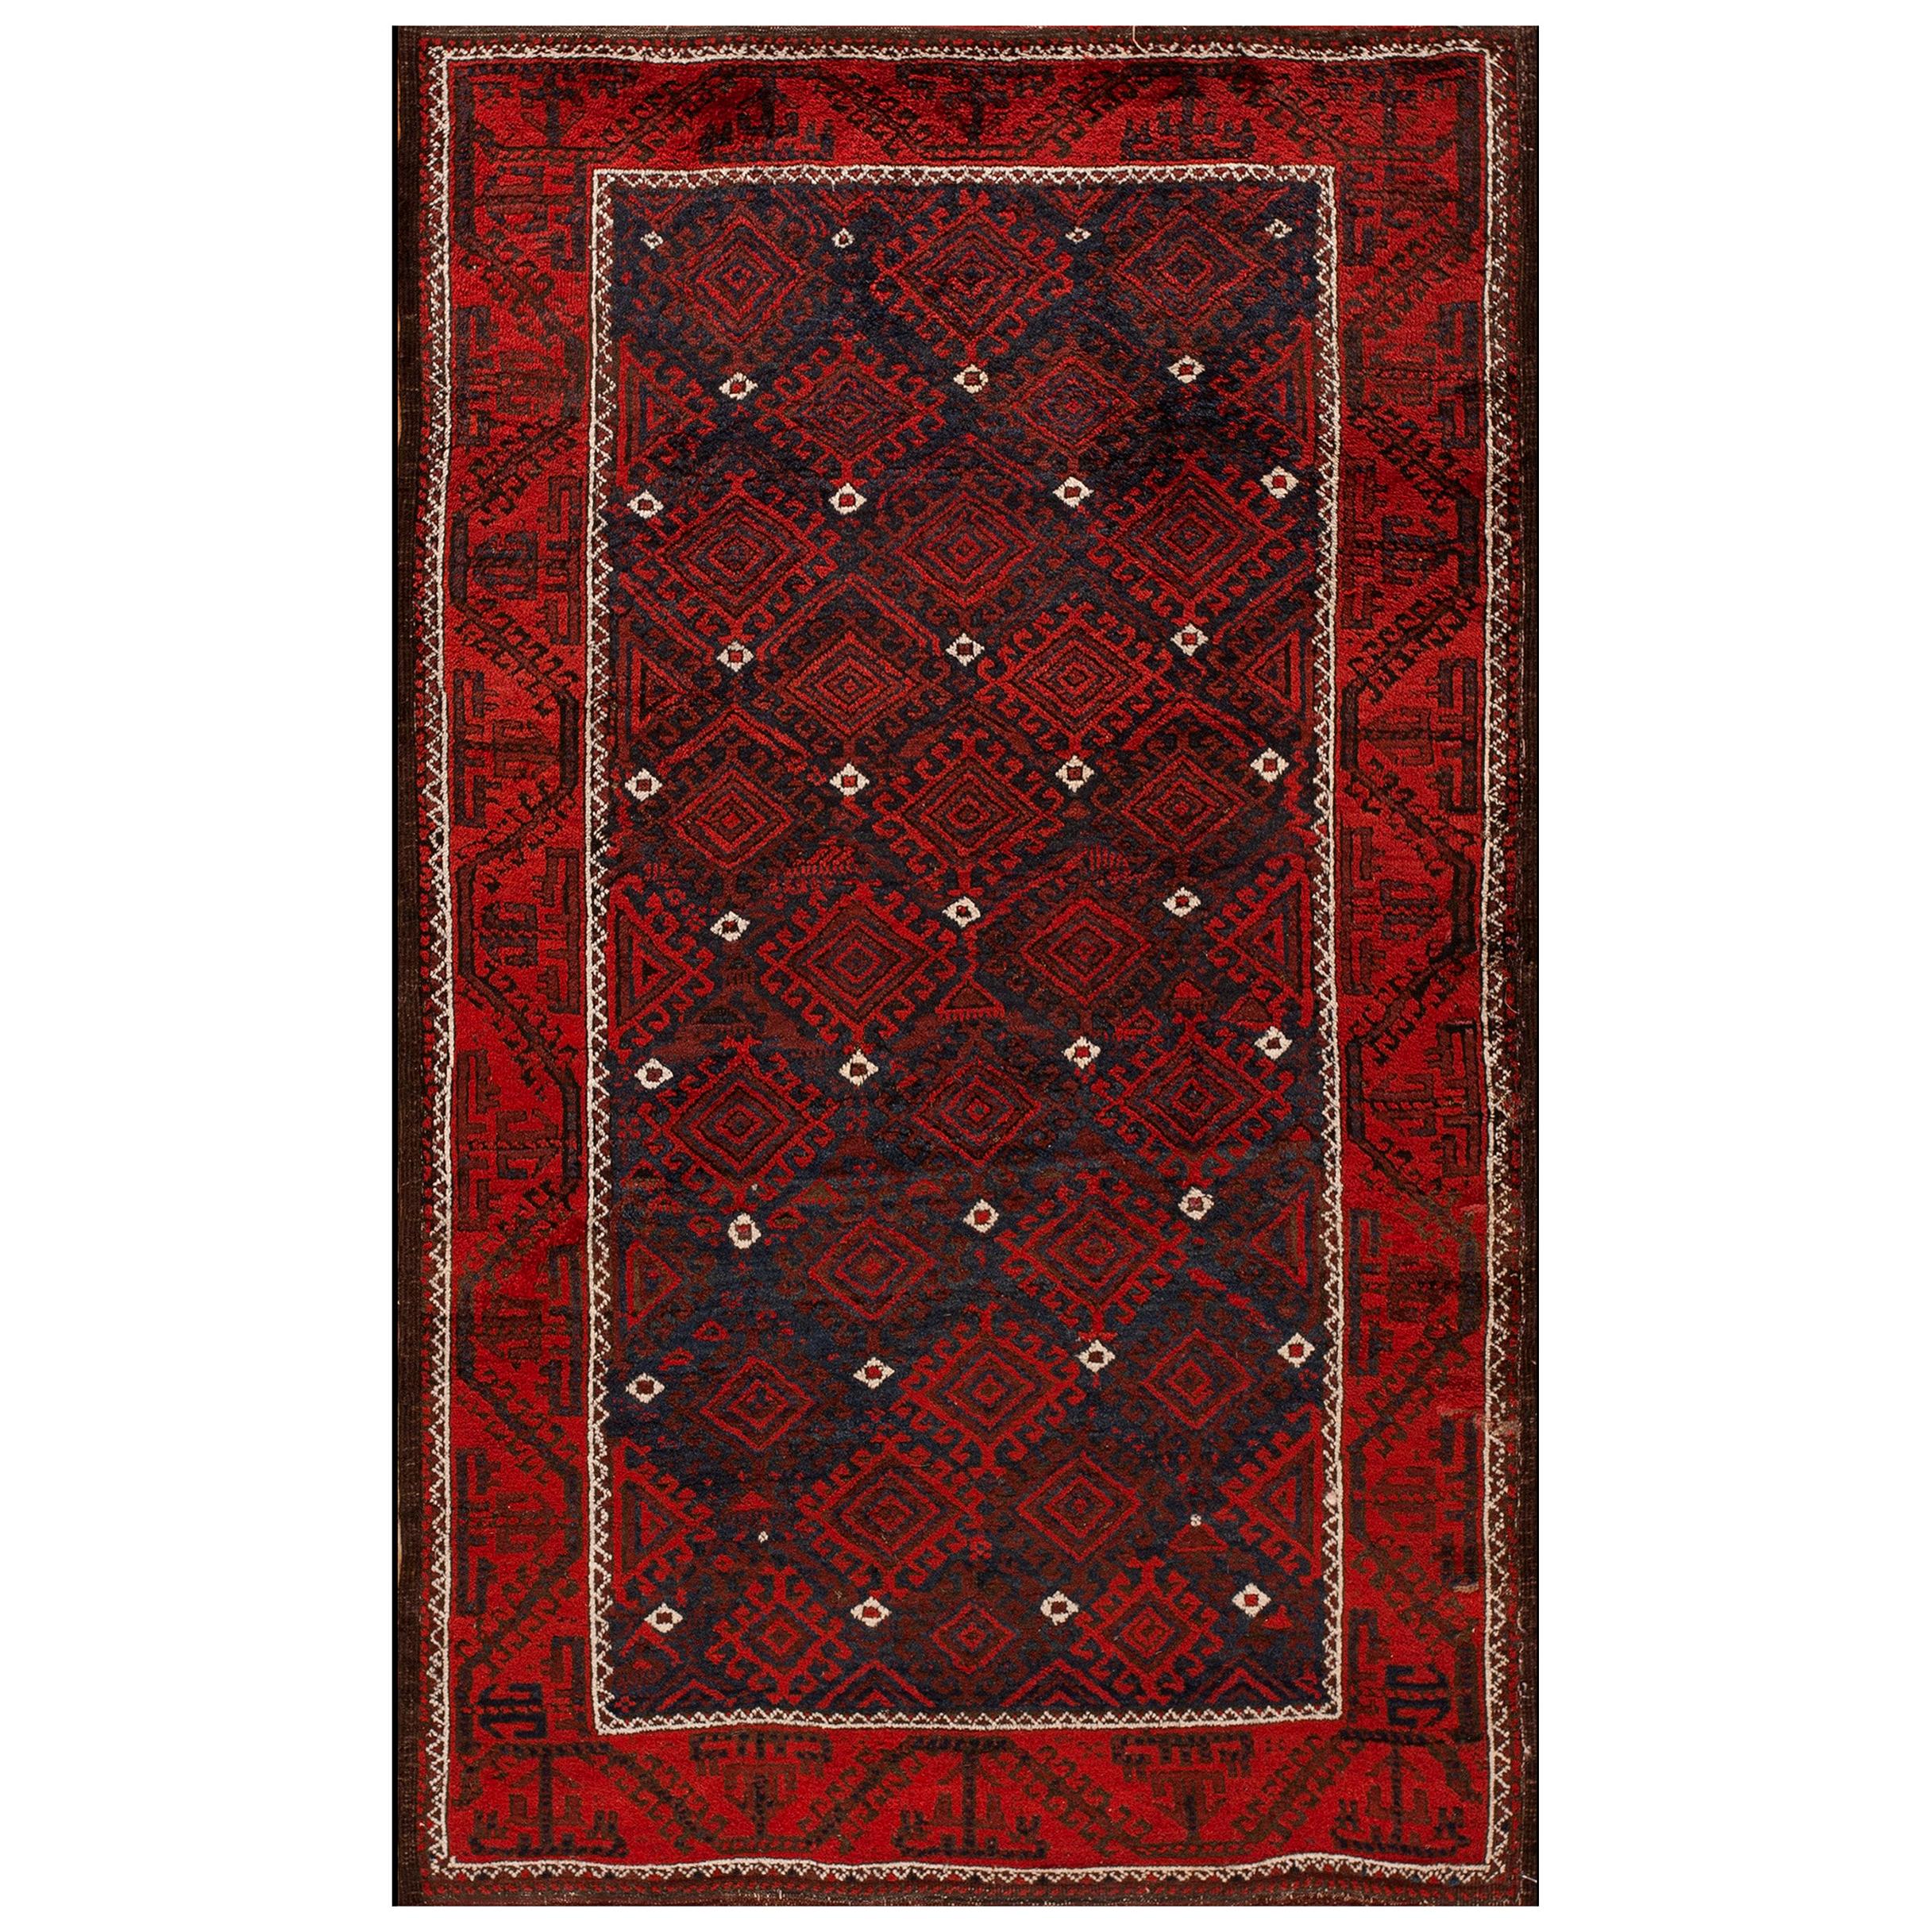 Early 20th Century N.E. Persian Baluch Carpet ( 3'8" x 6' - 112 x 183 ) For Sale